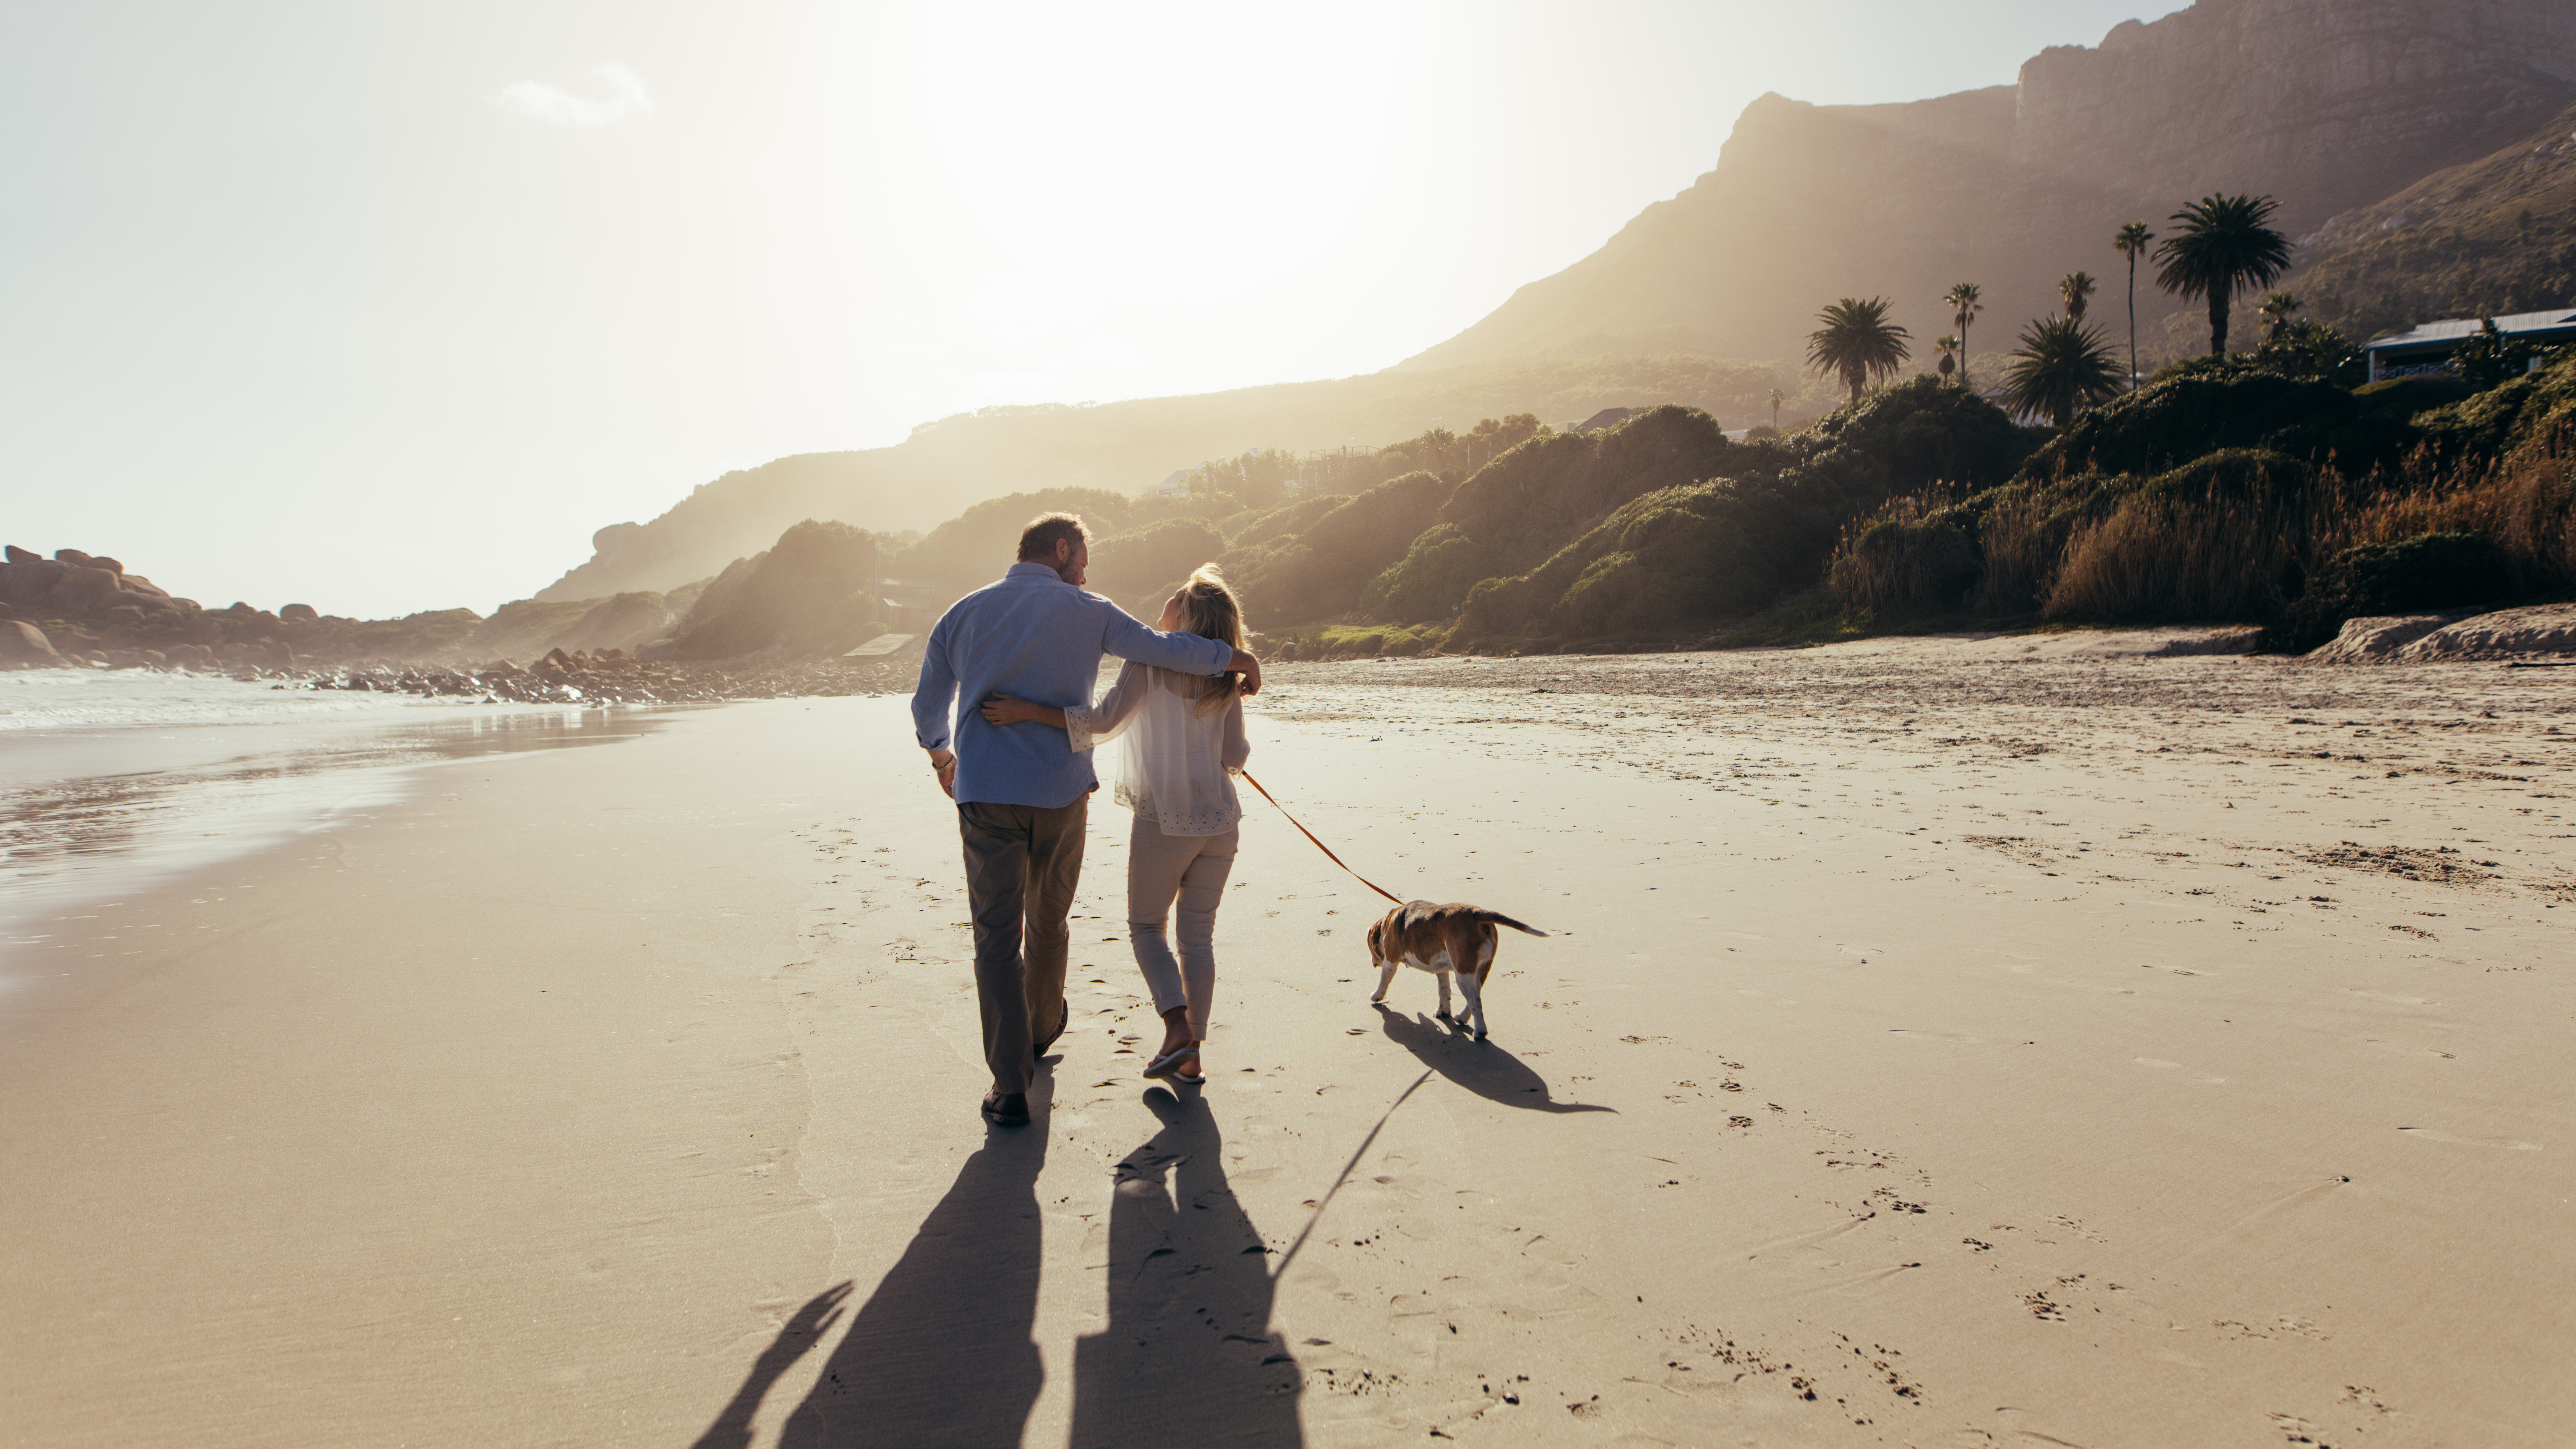 A rear view of a mature couple strolling with their dog on the beach